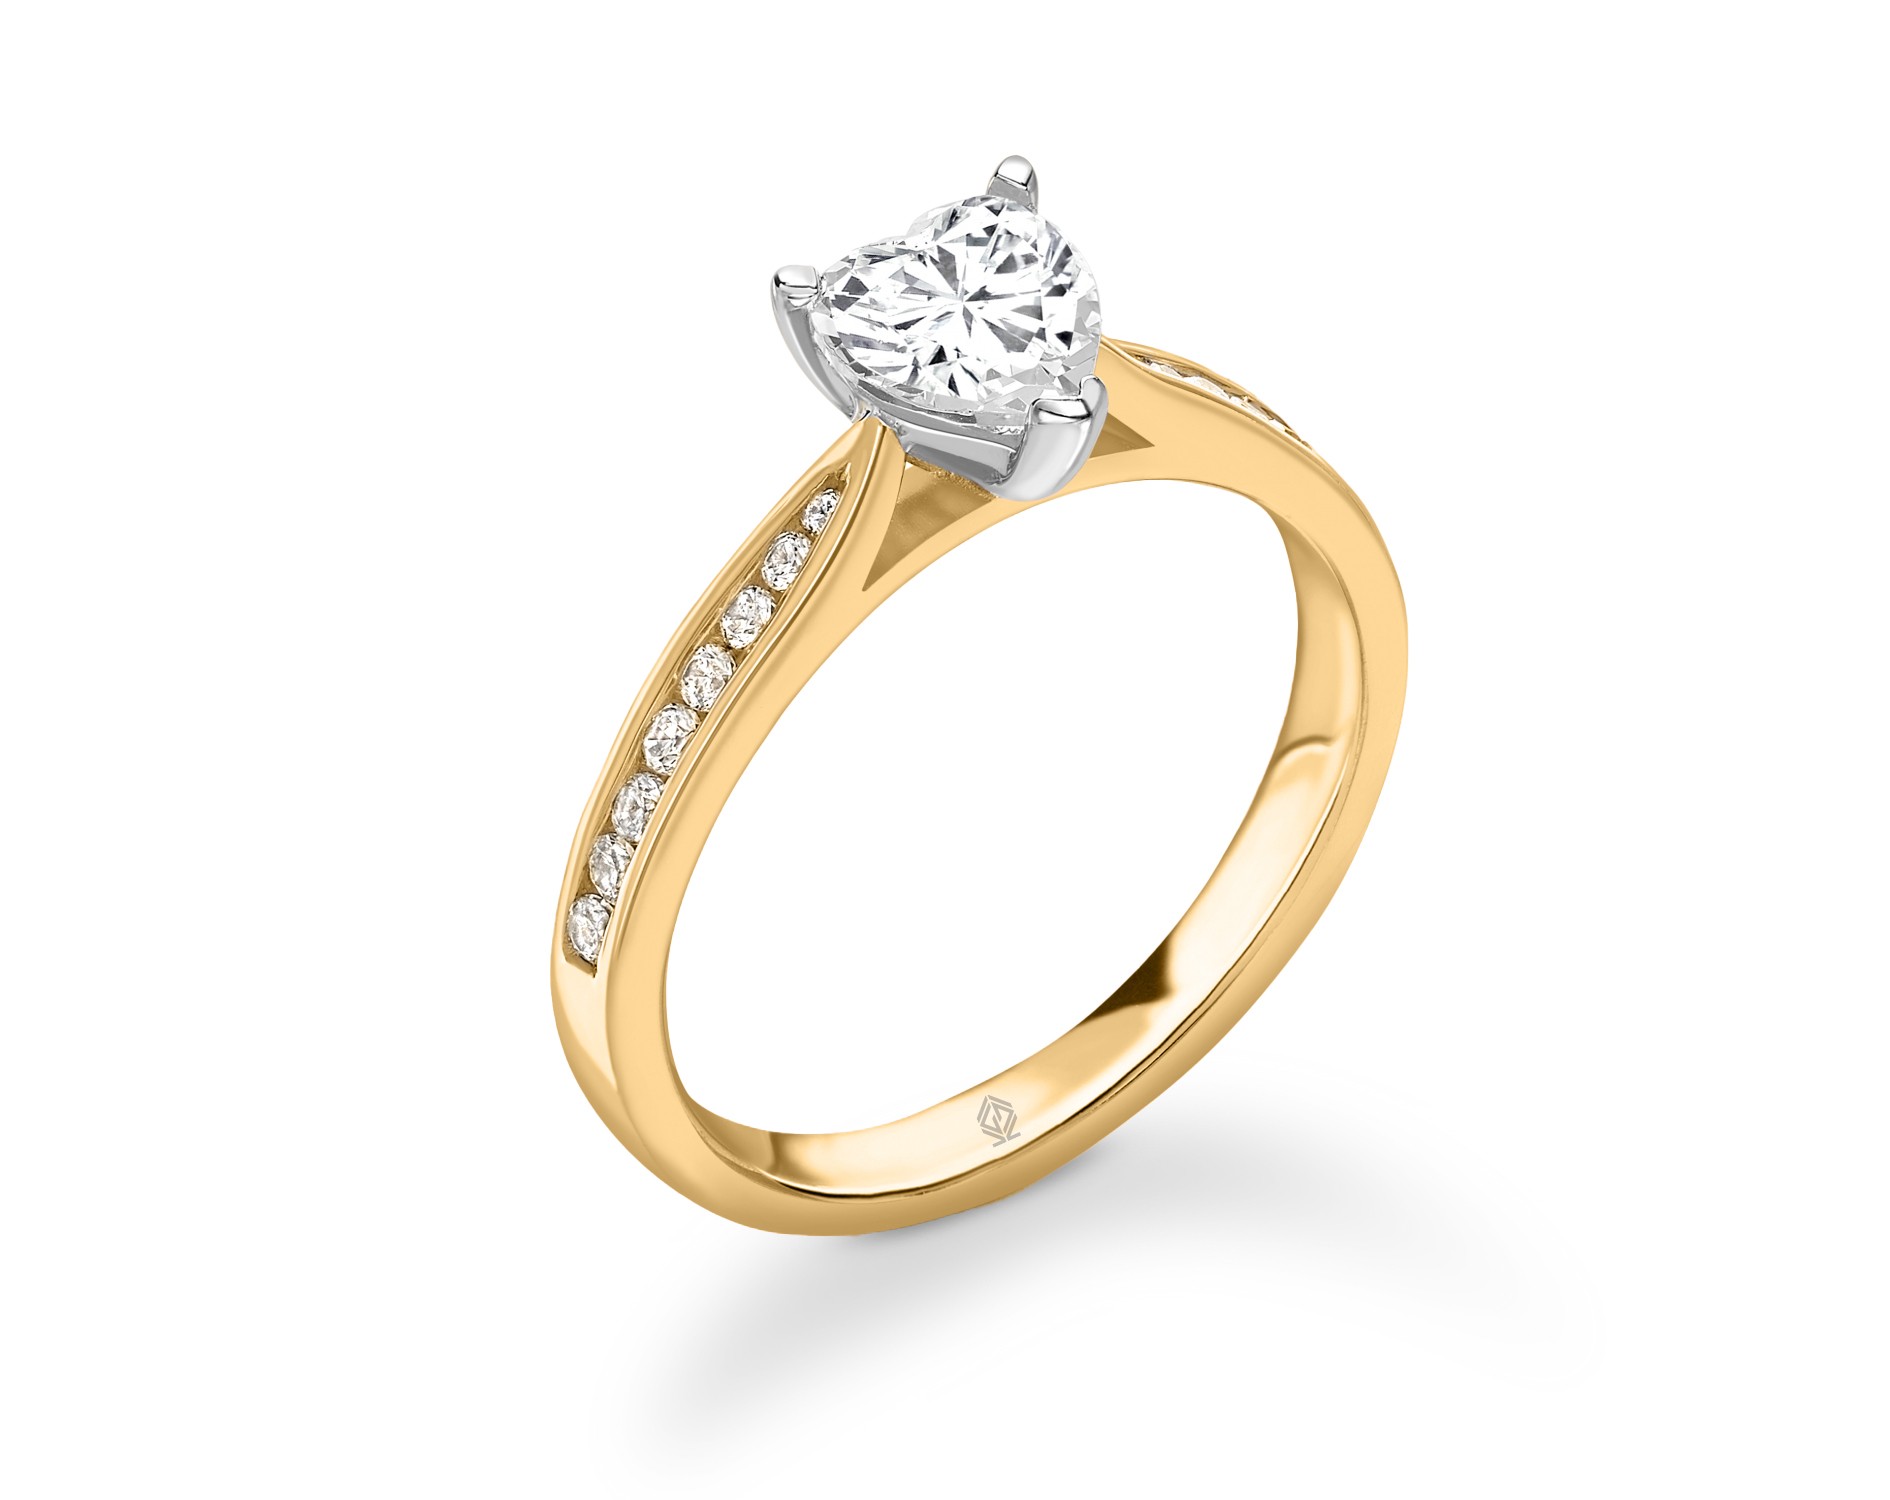 DUAL-TONE HEART CUT DIAMOND ENGAGEMENT RING WITH SIDE STONES CHANNEL SET